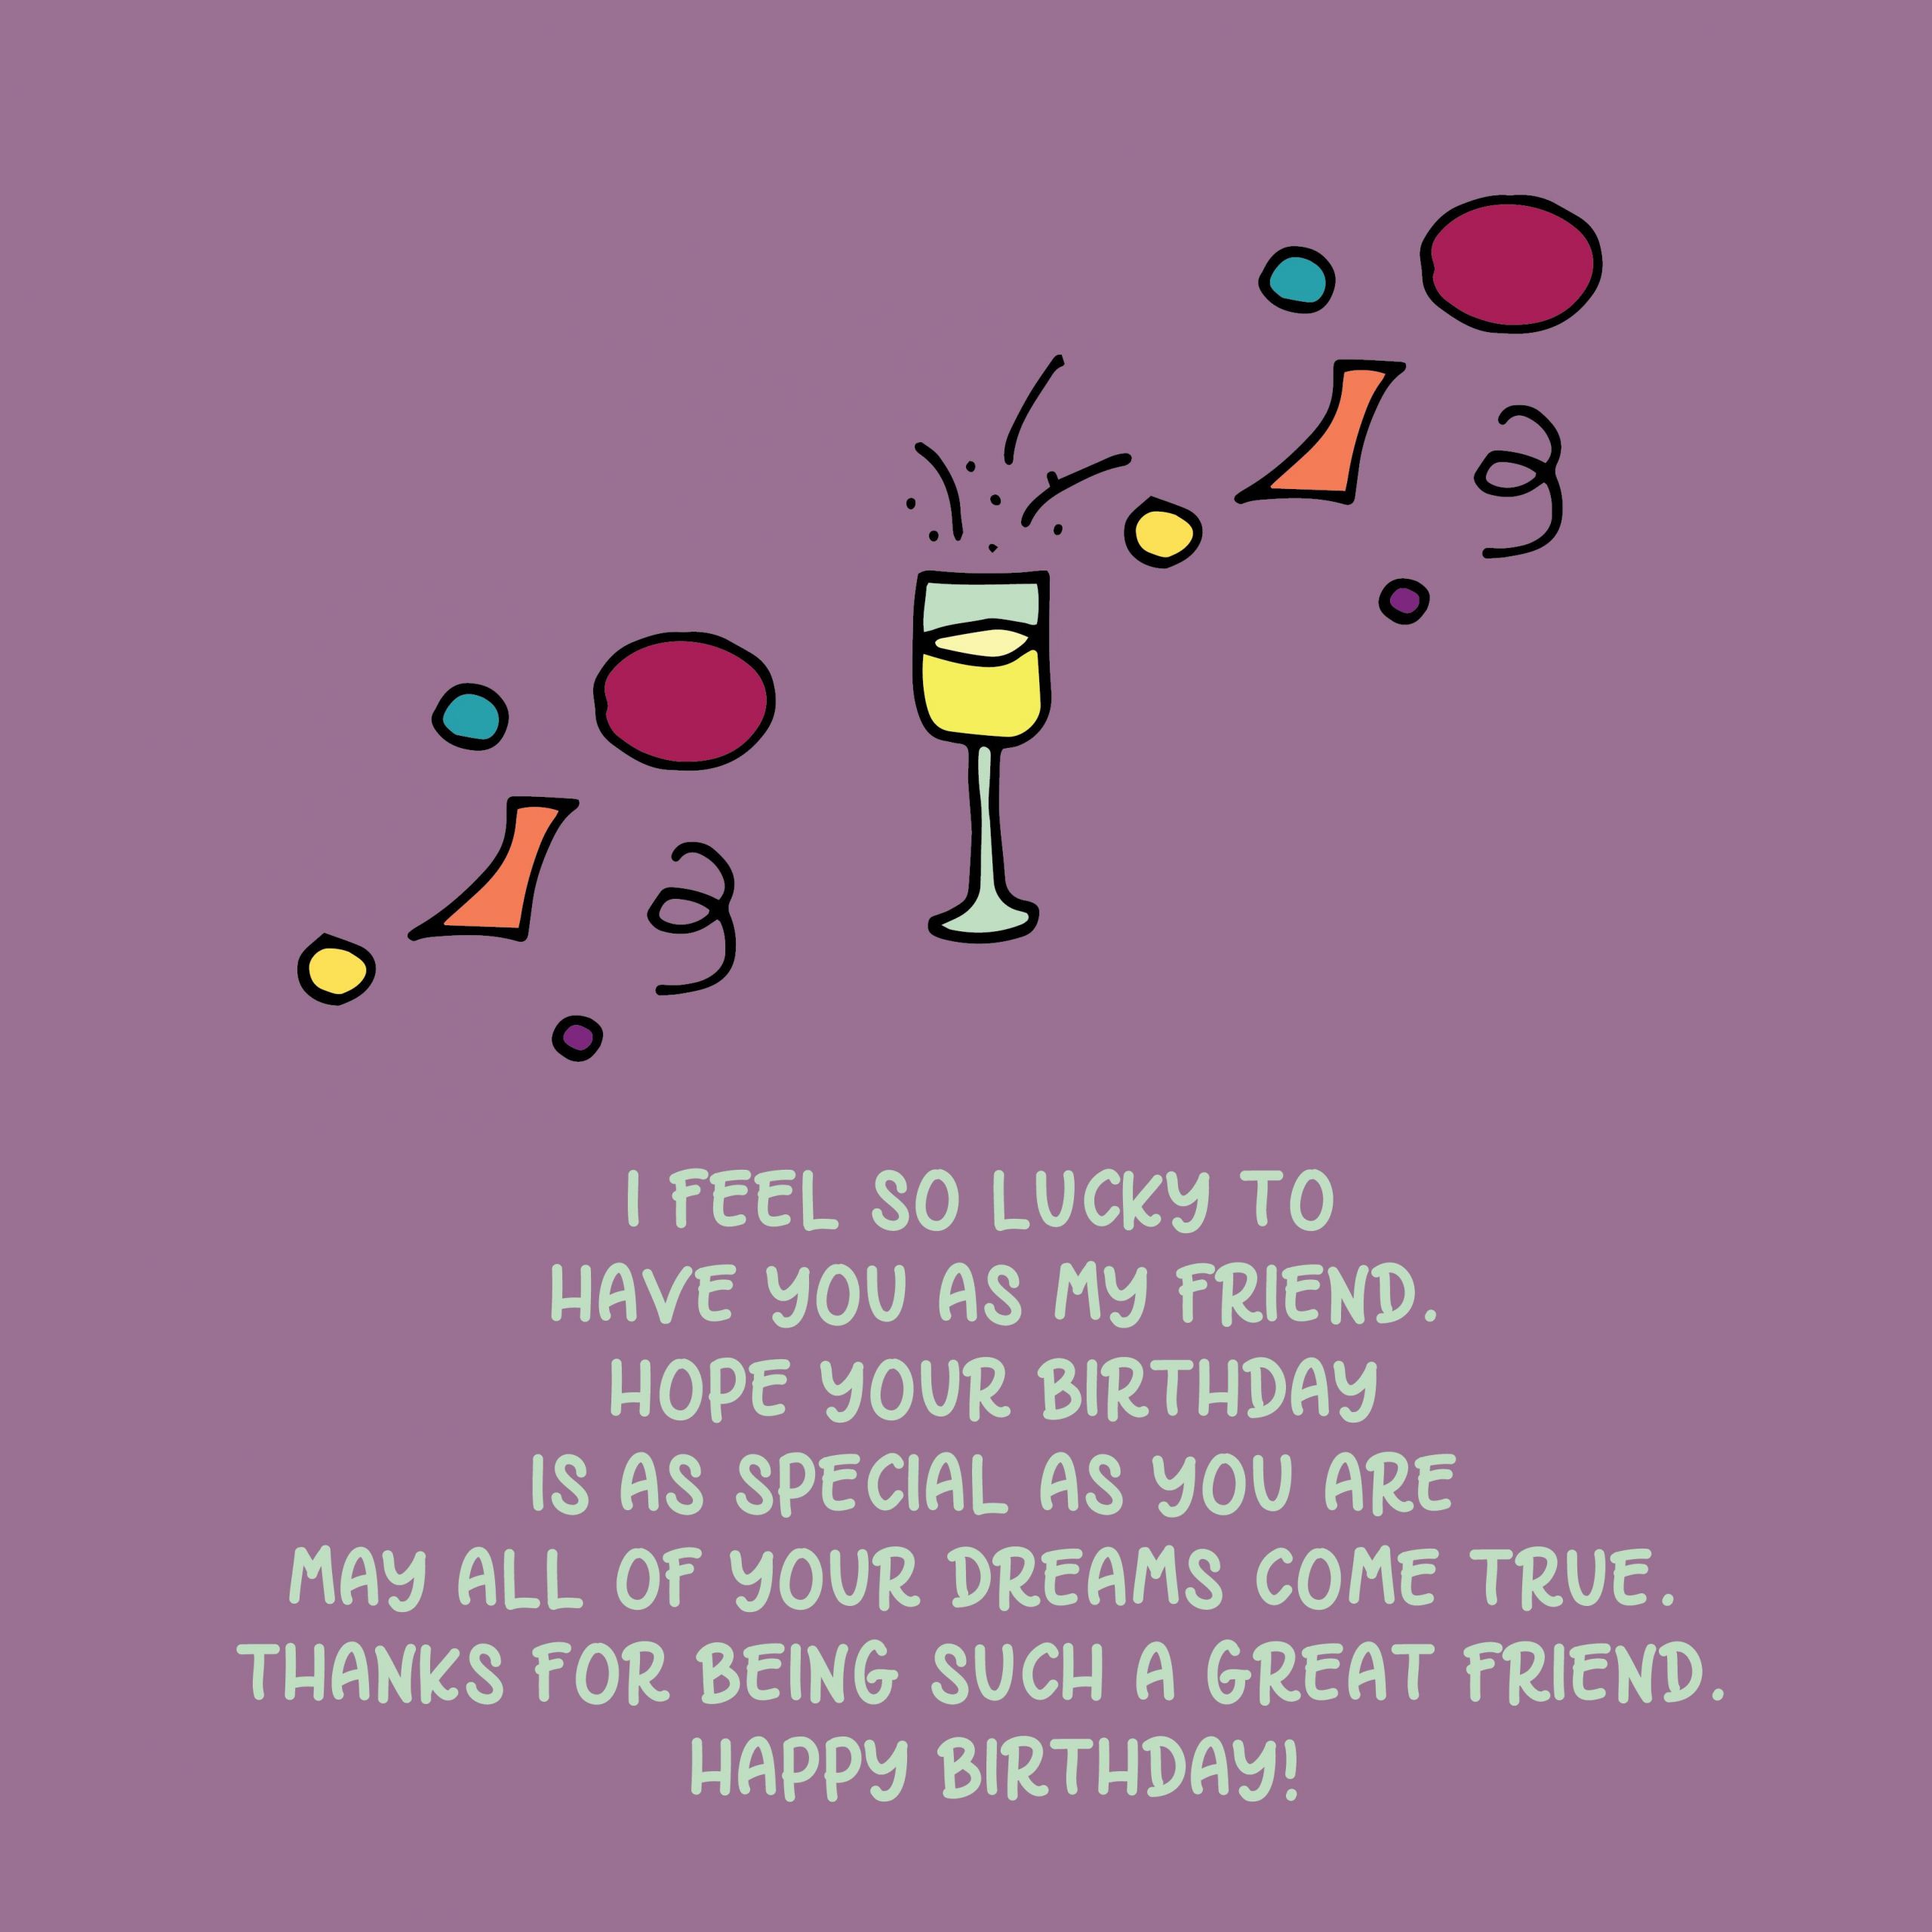 Friend Quotes For Birthday
 Happy Birthday Quotes and Wishes for Friends – Top Happy